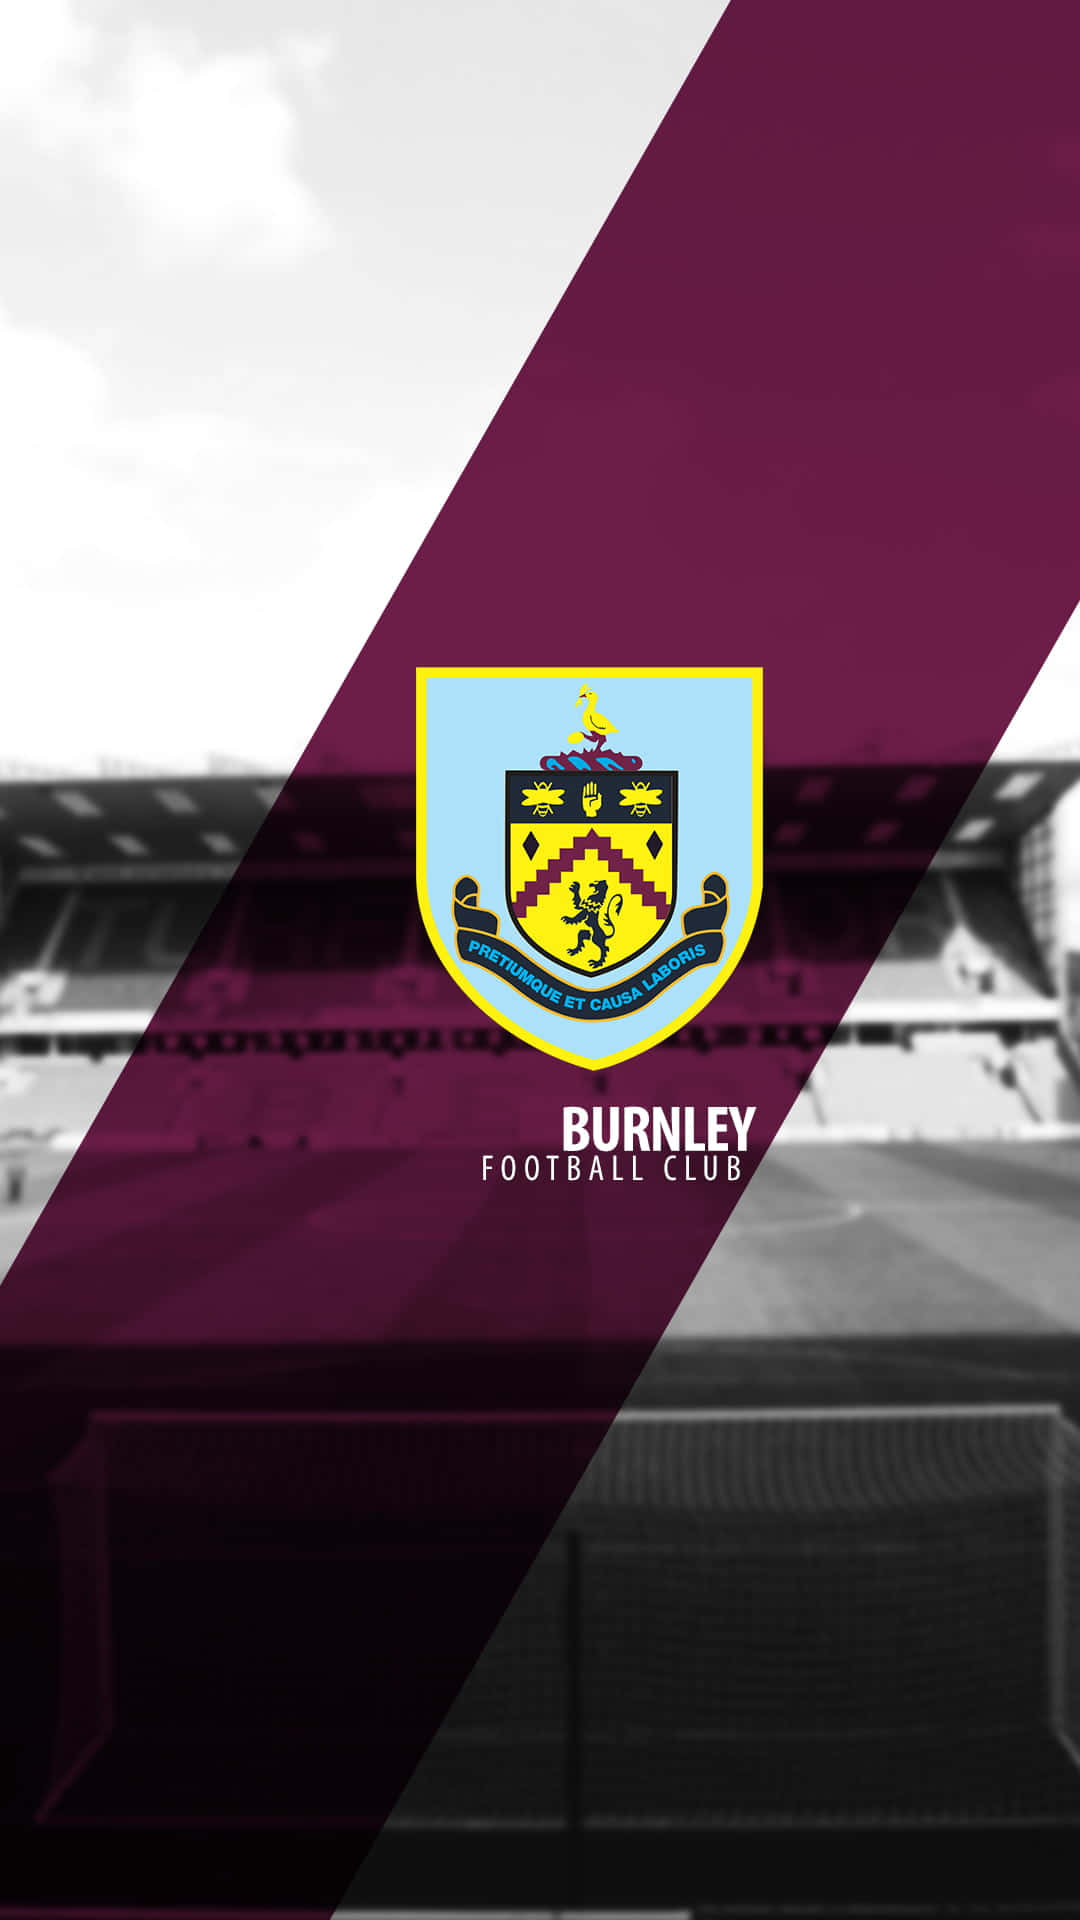 Burnley FC Players in Action Wallpaper